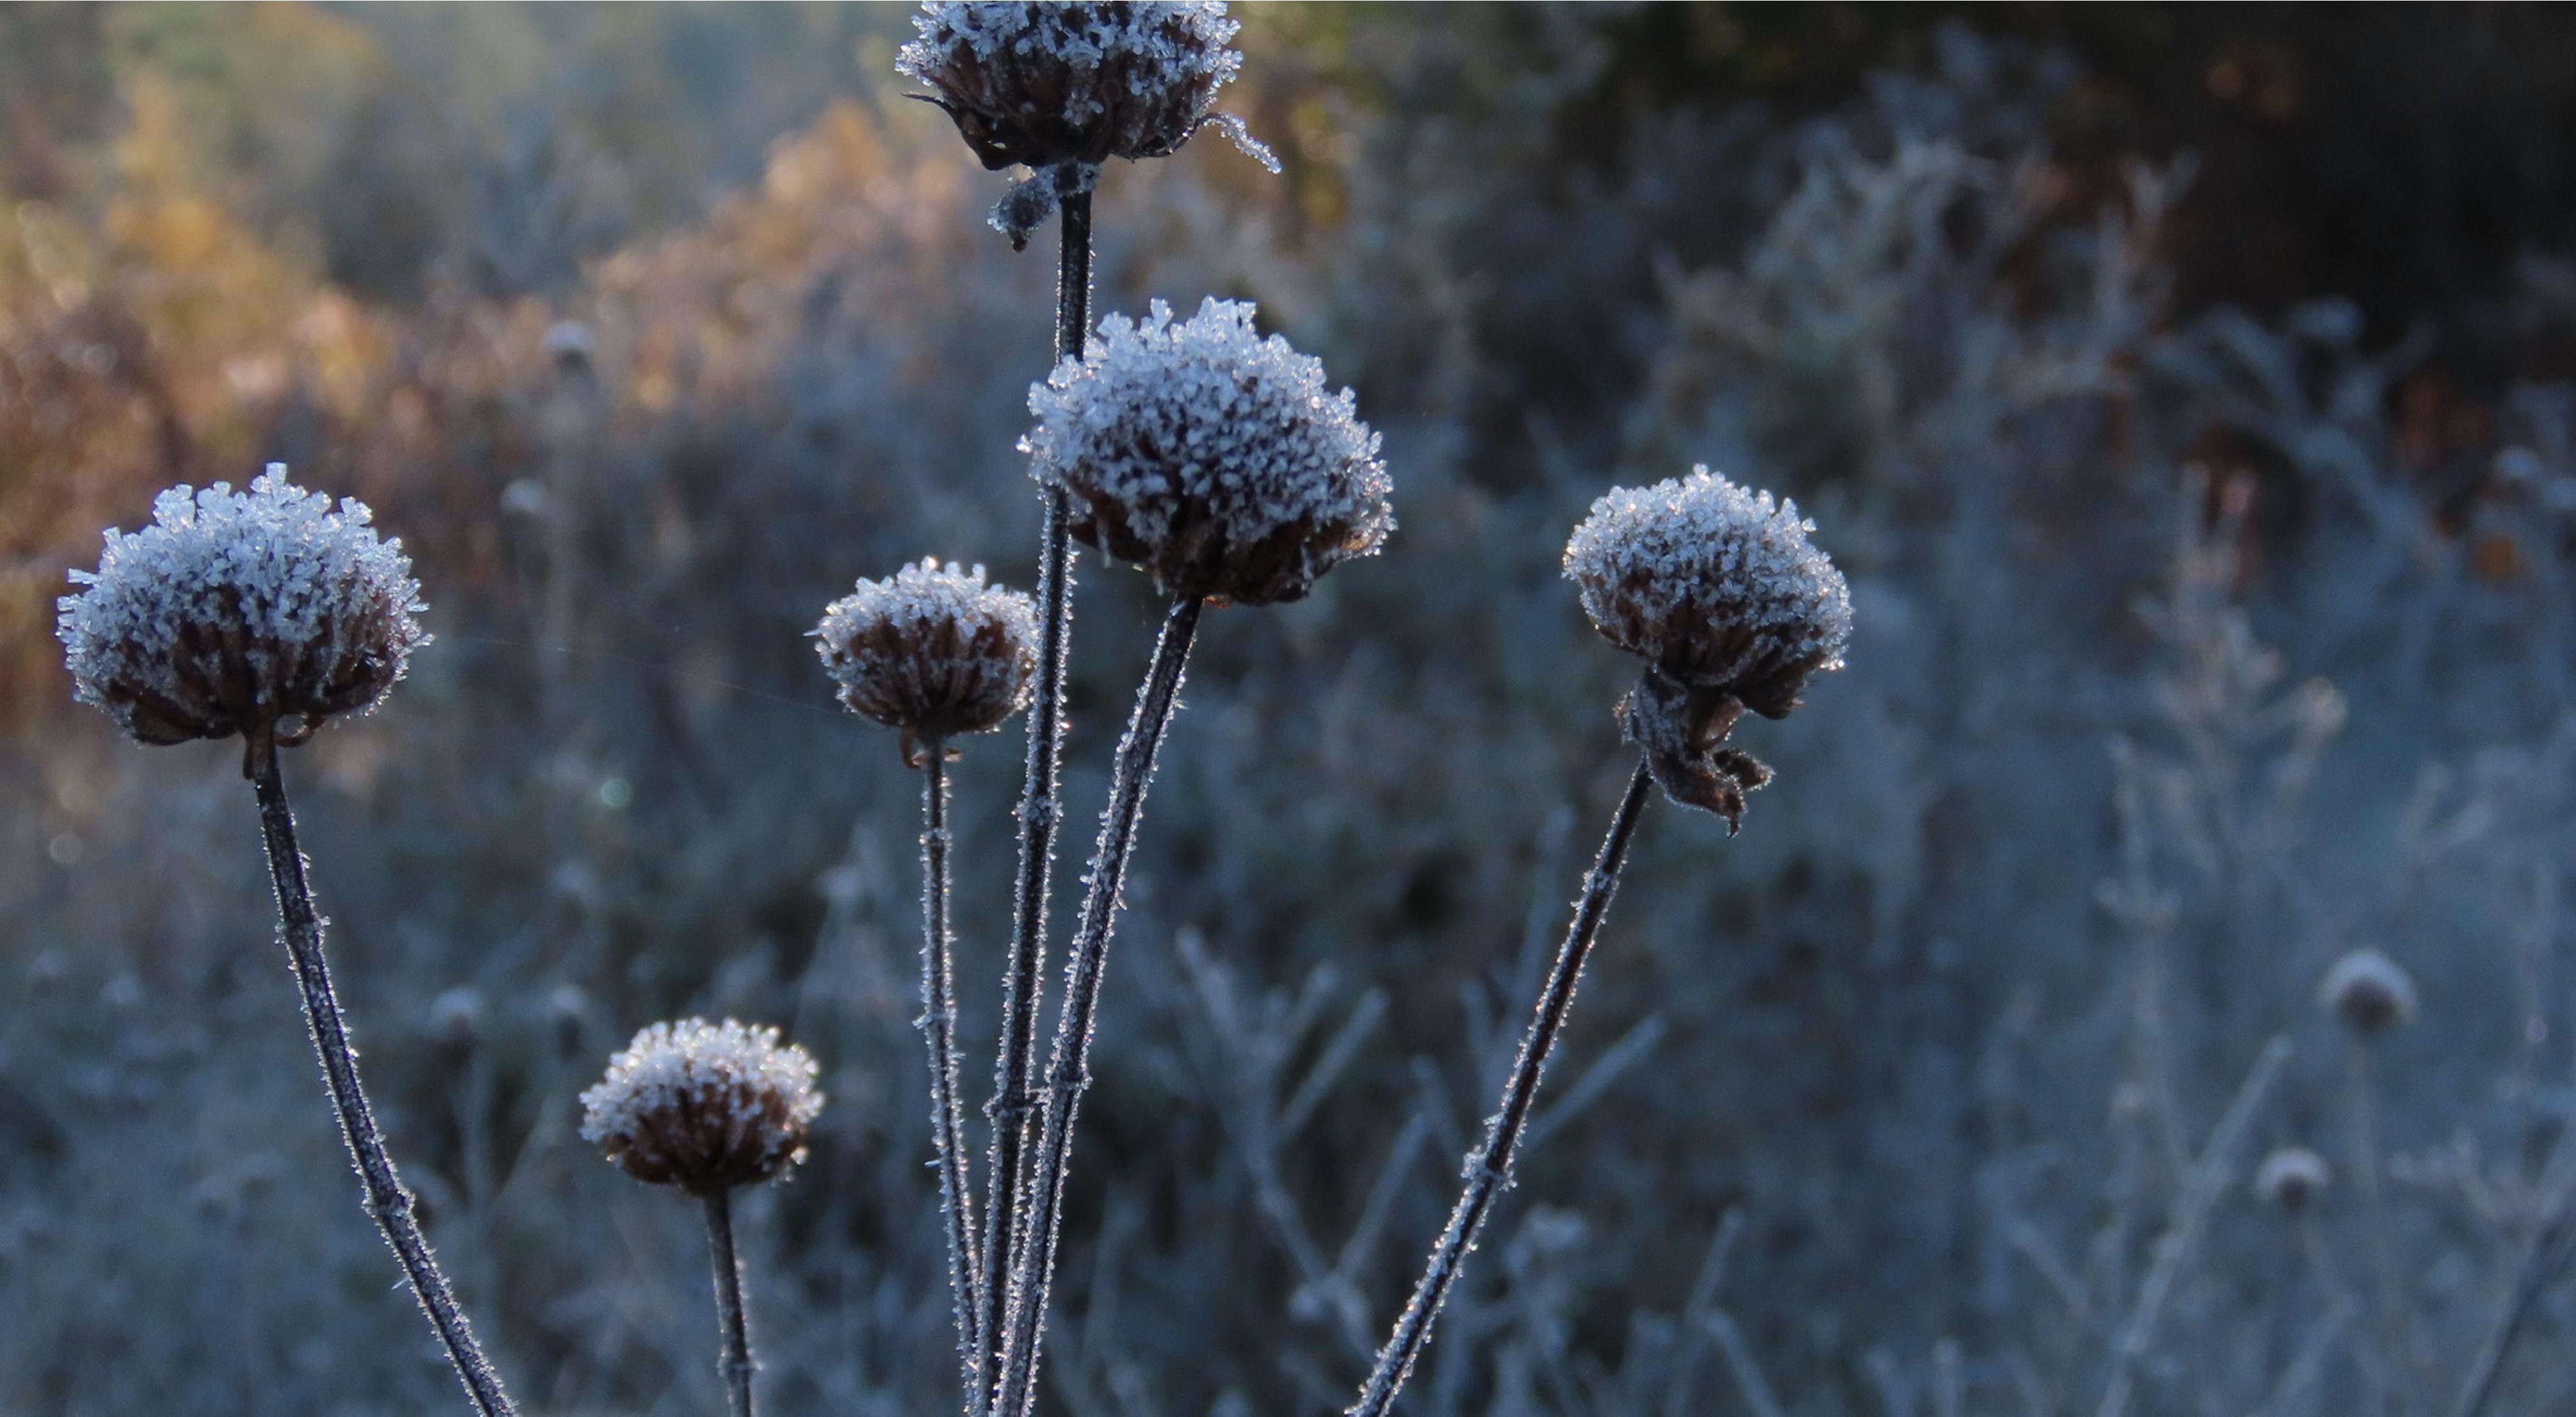 Frost covers five, round dormant flowers still on stems.